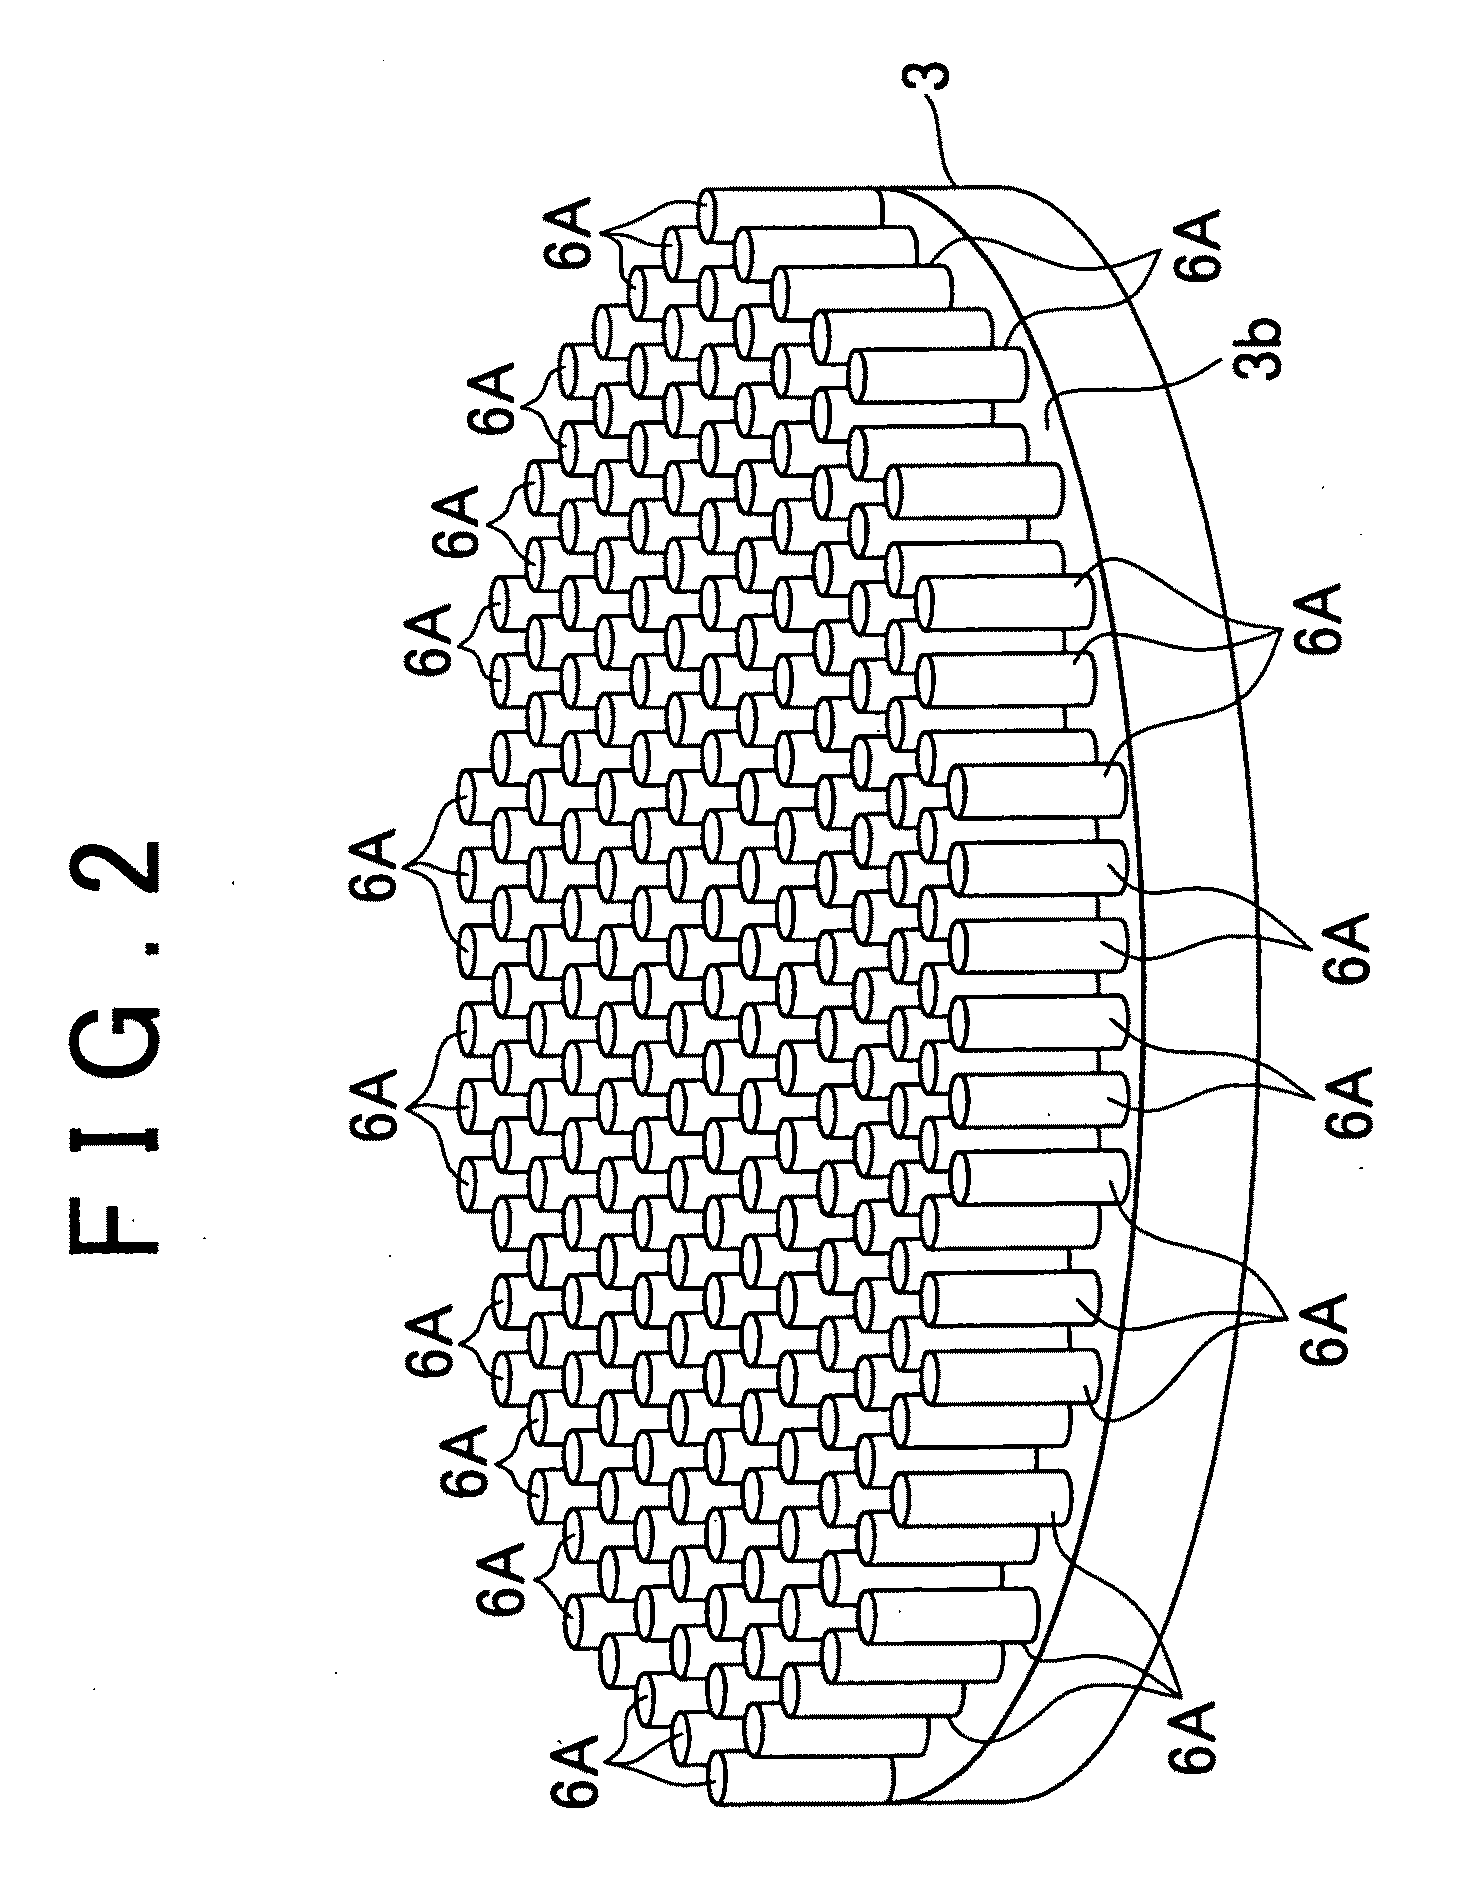 Hollow valve for internal combustion engine, and internal combustion engine having the hollow valve